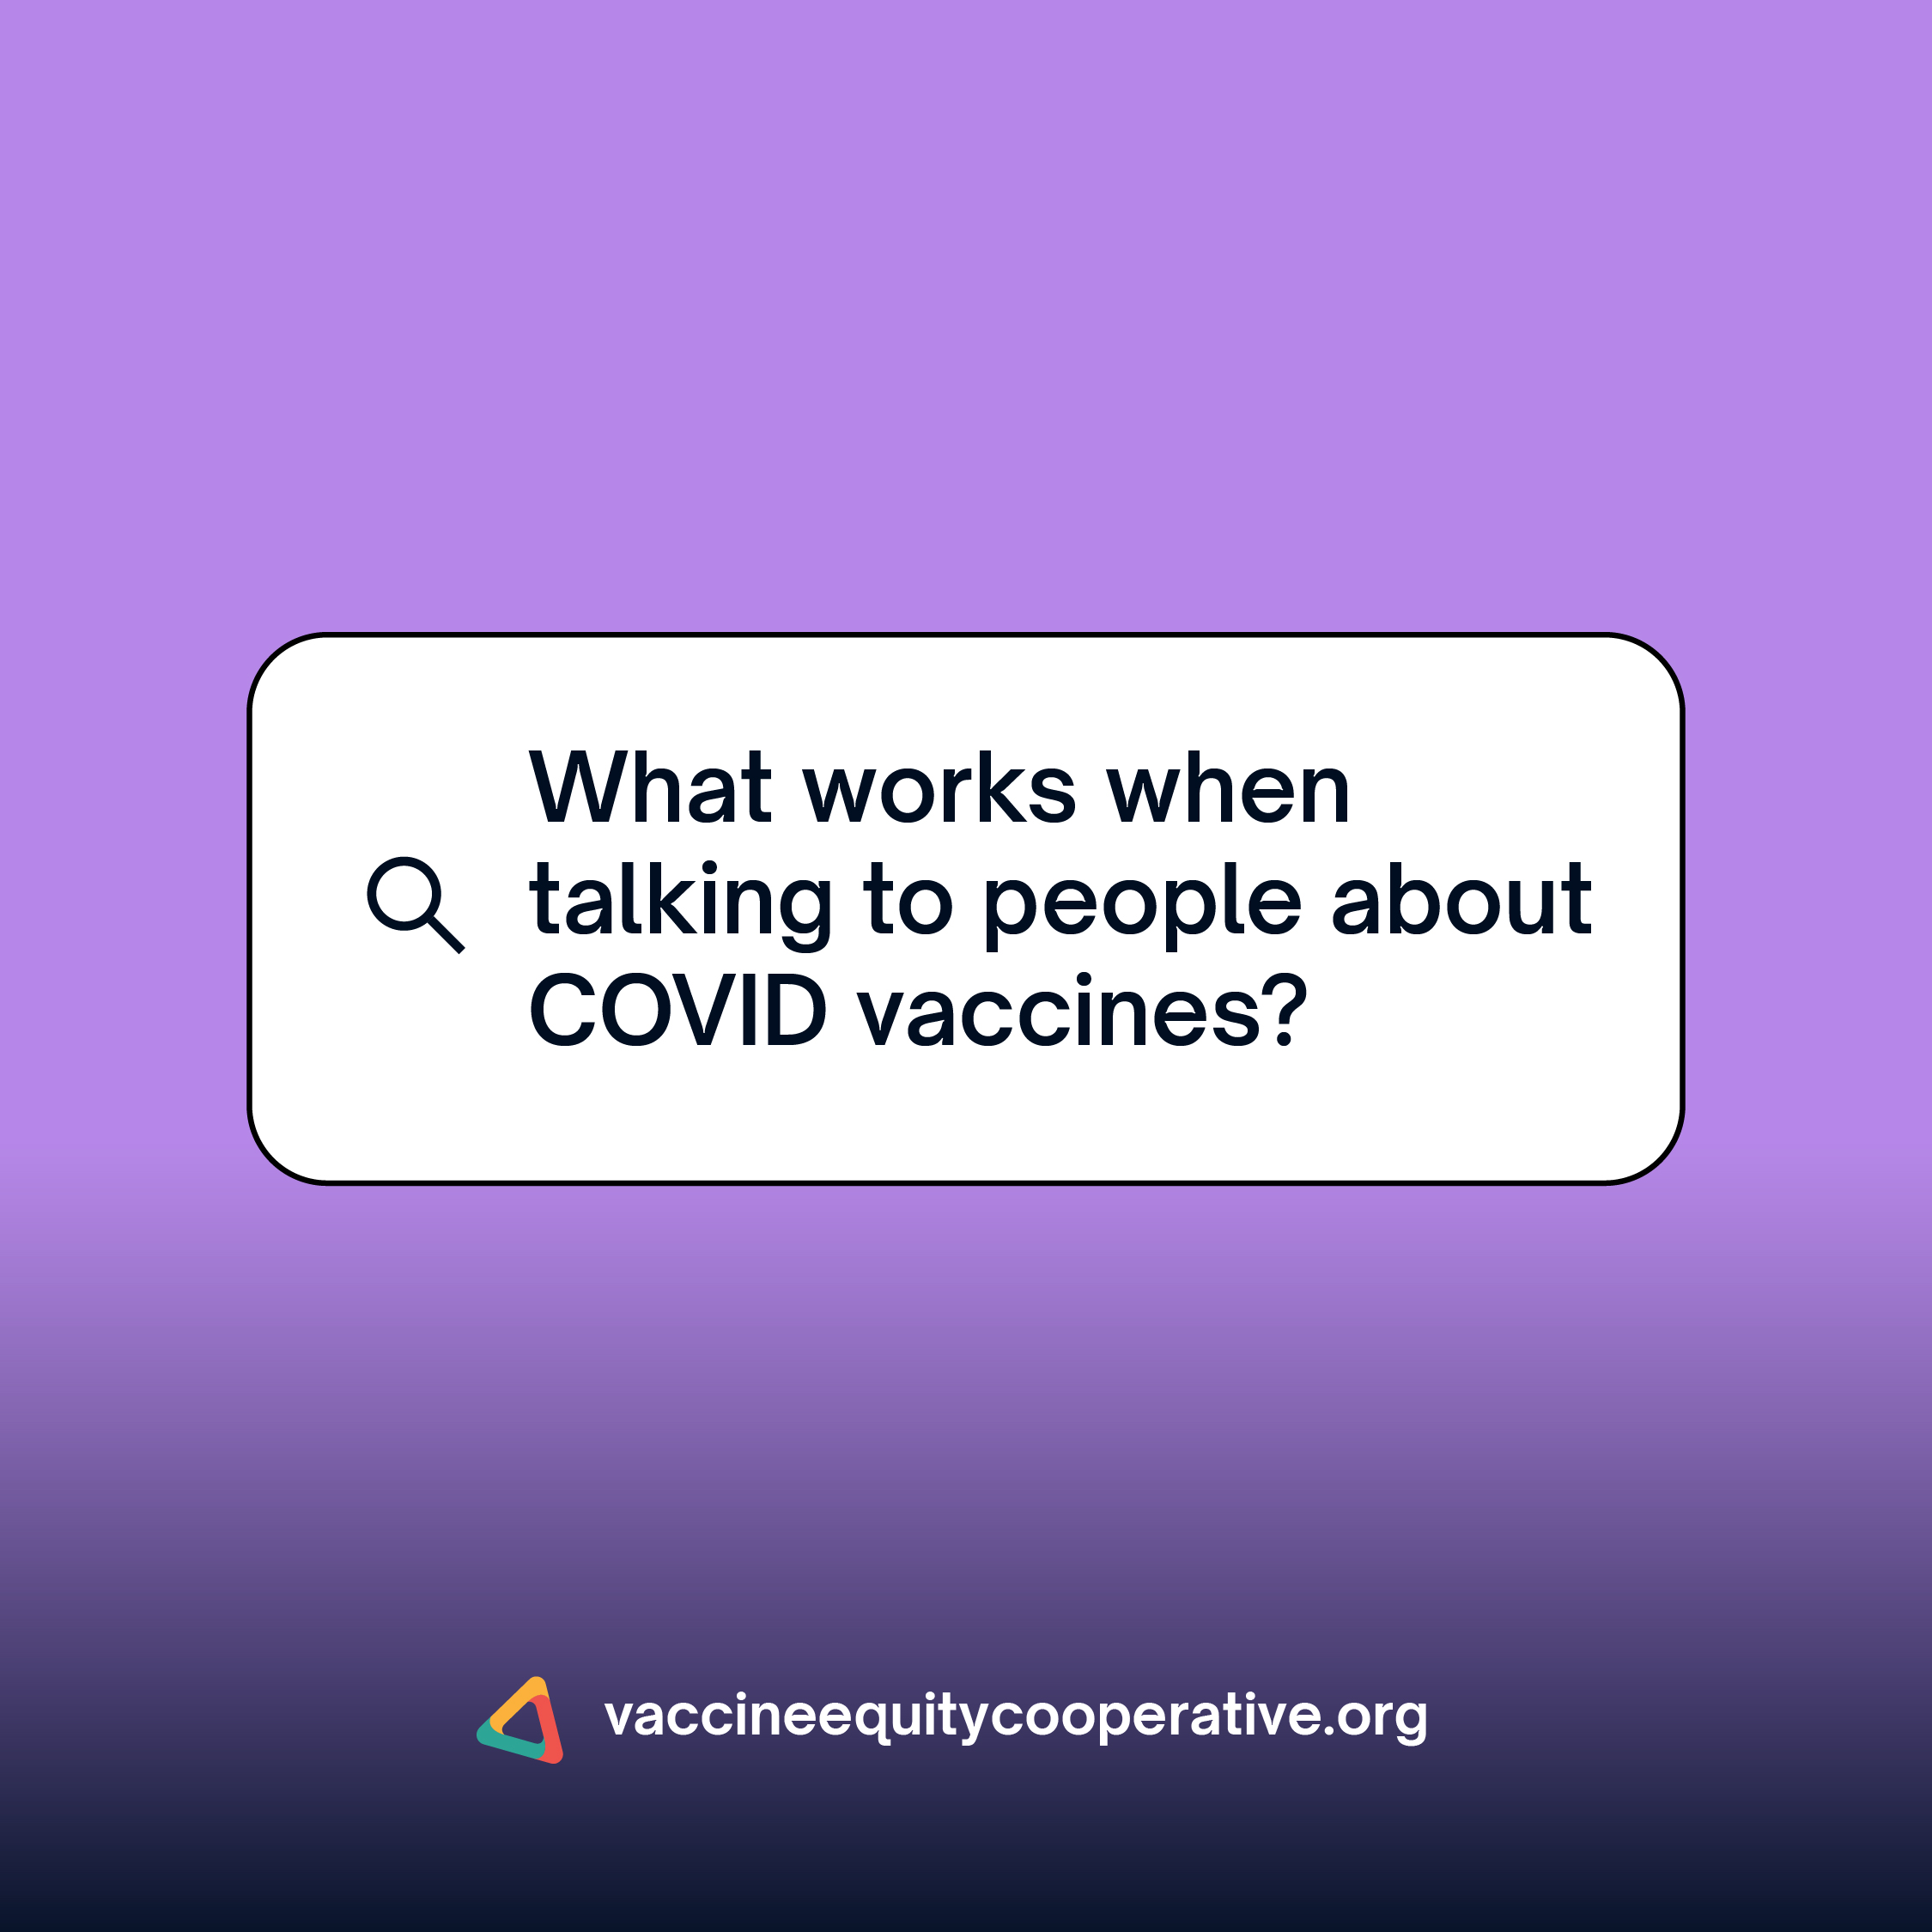 Google search box with text "What works when talking to people about COVID vaccines?"